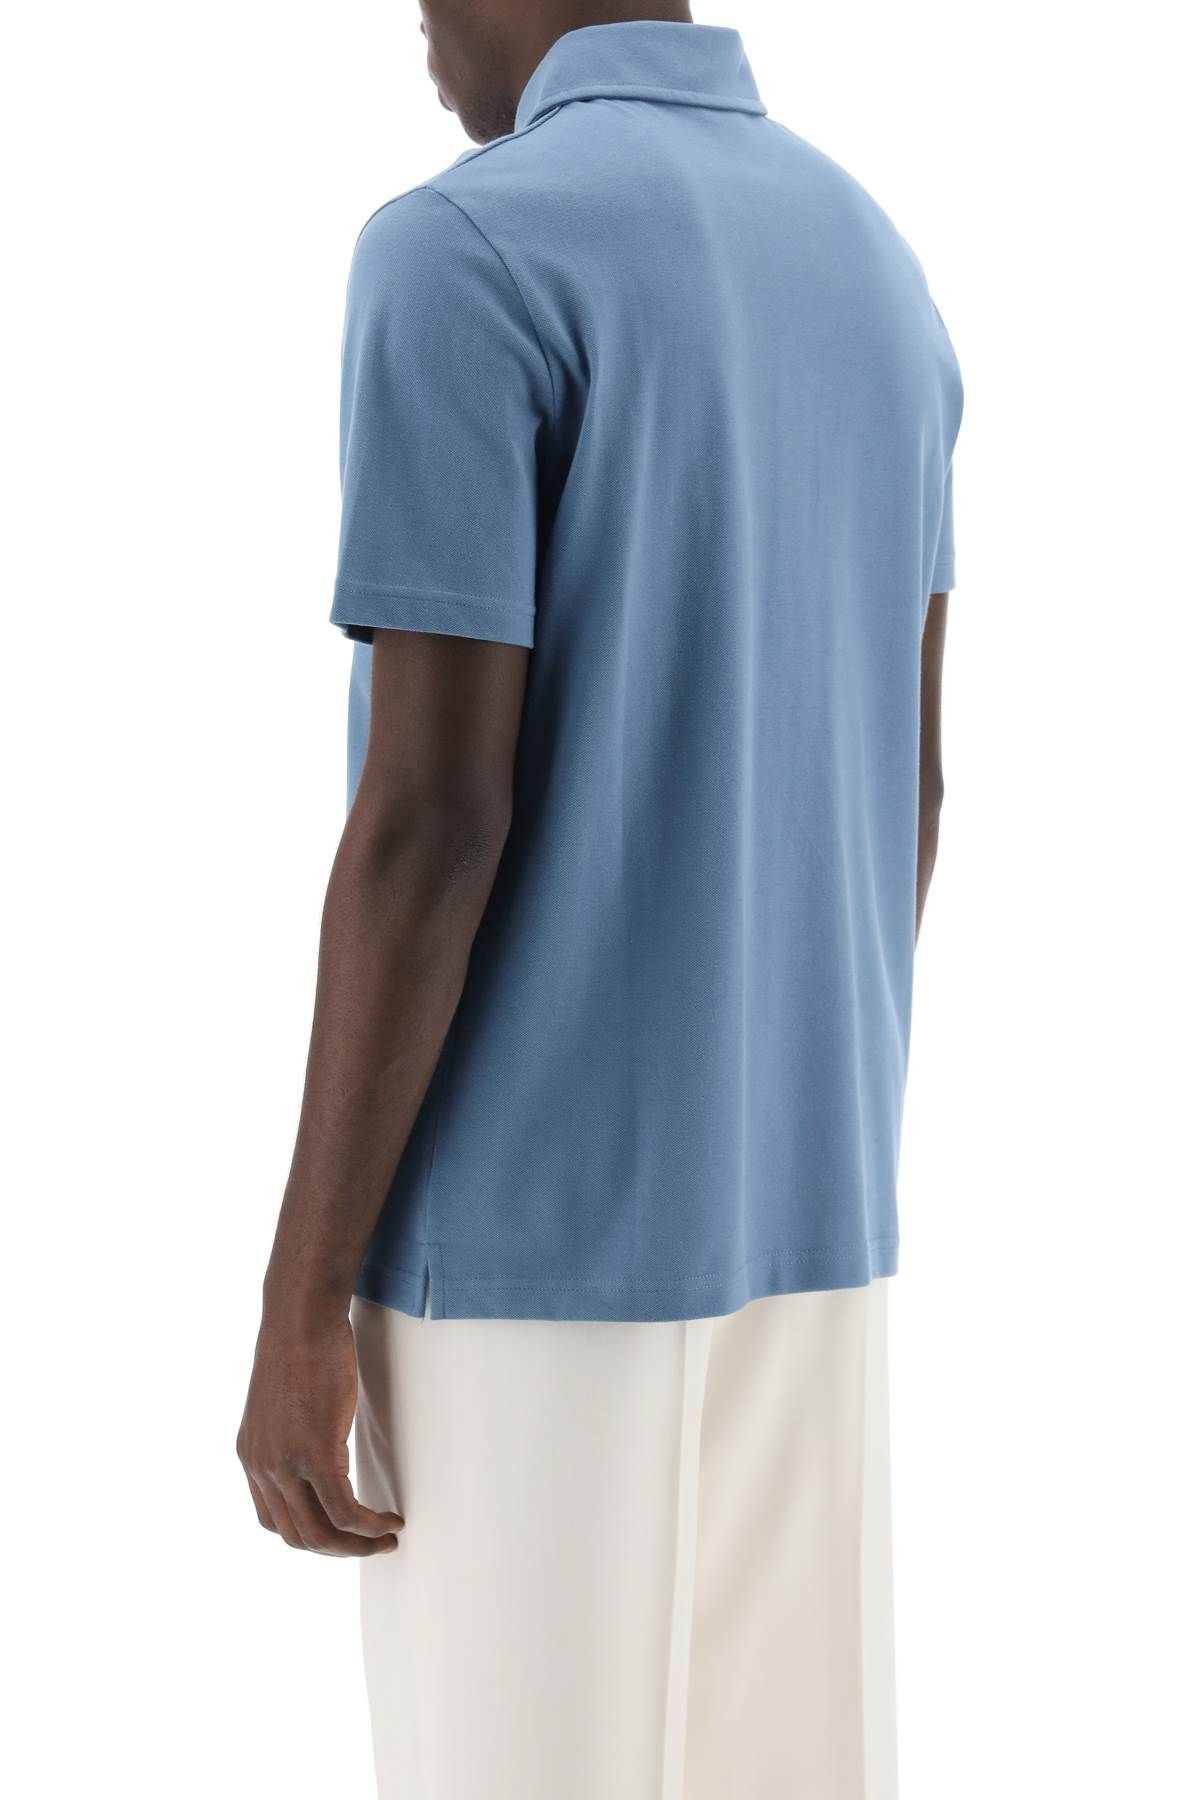 Shop Apc Austin Polo Shirt With Logo Embroidery In Light Blue